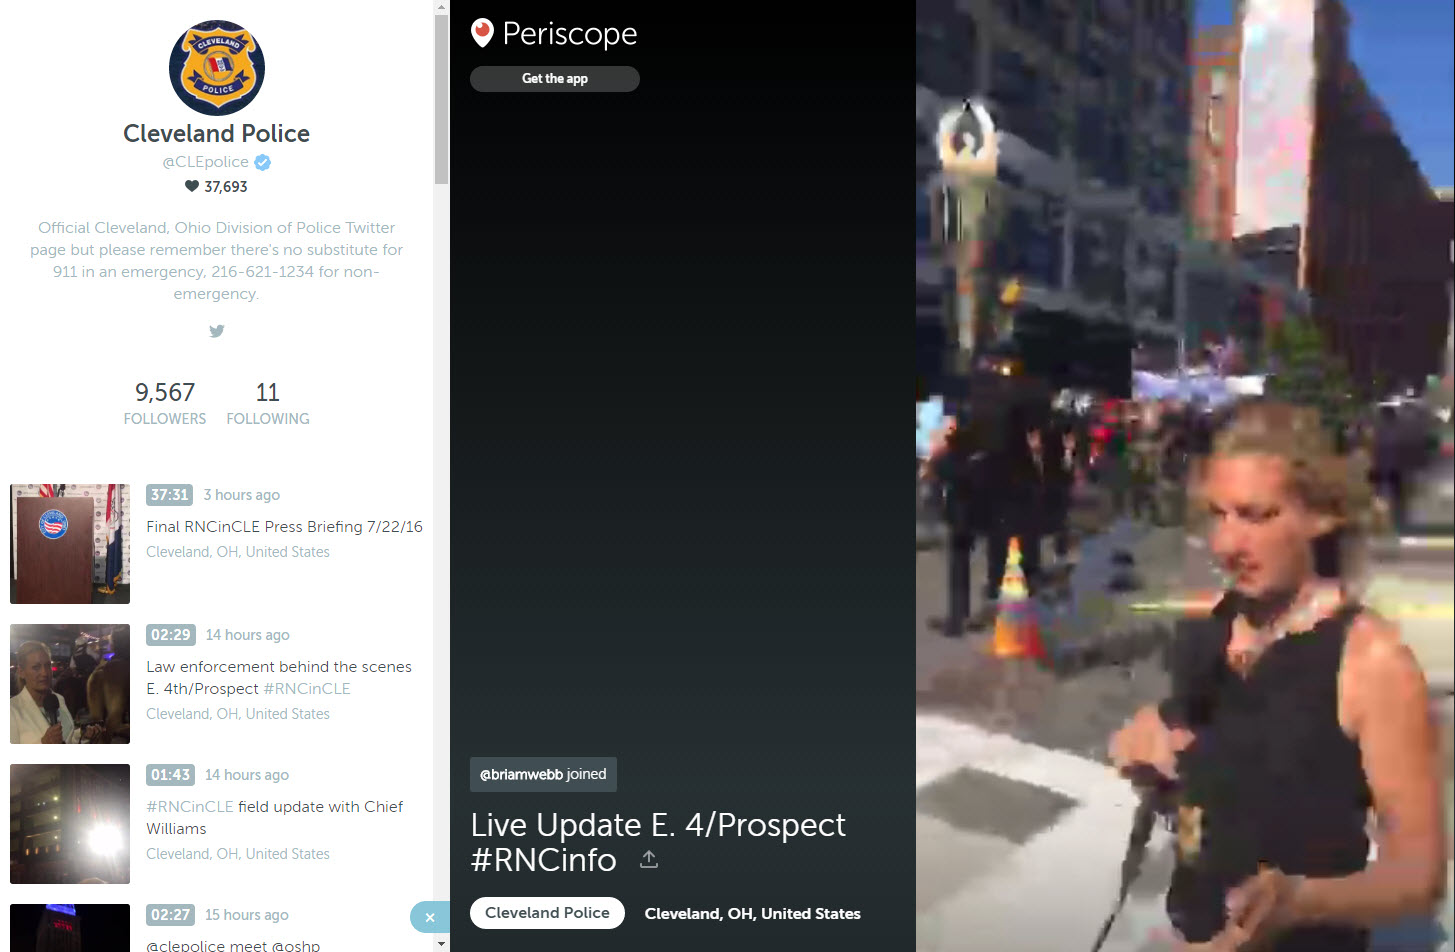 Screenshot of a livestreaming video feed of a demonstration on a Cleveland Police Periscope account.